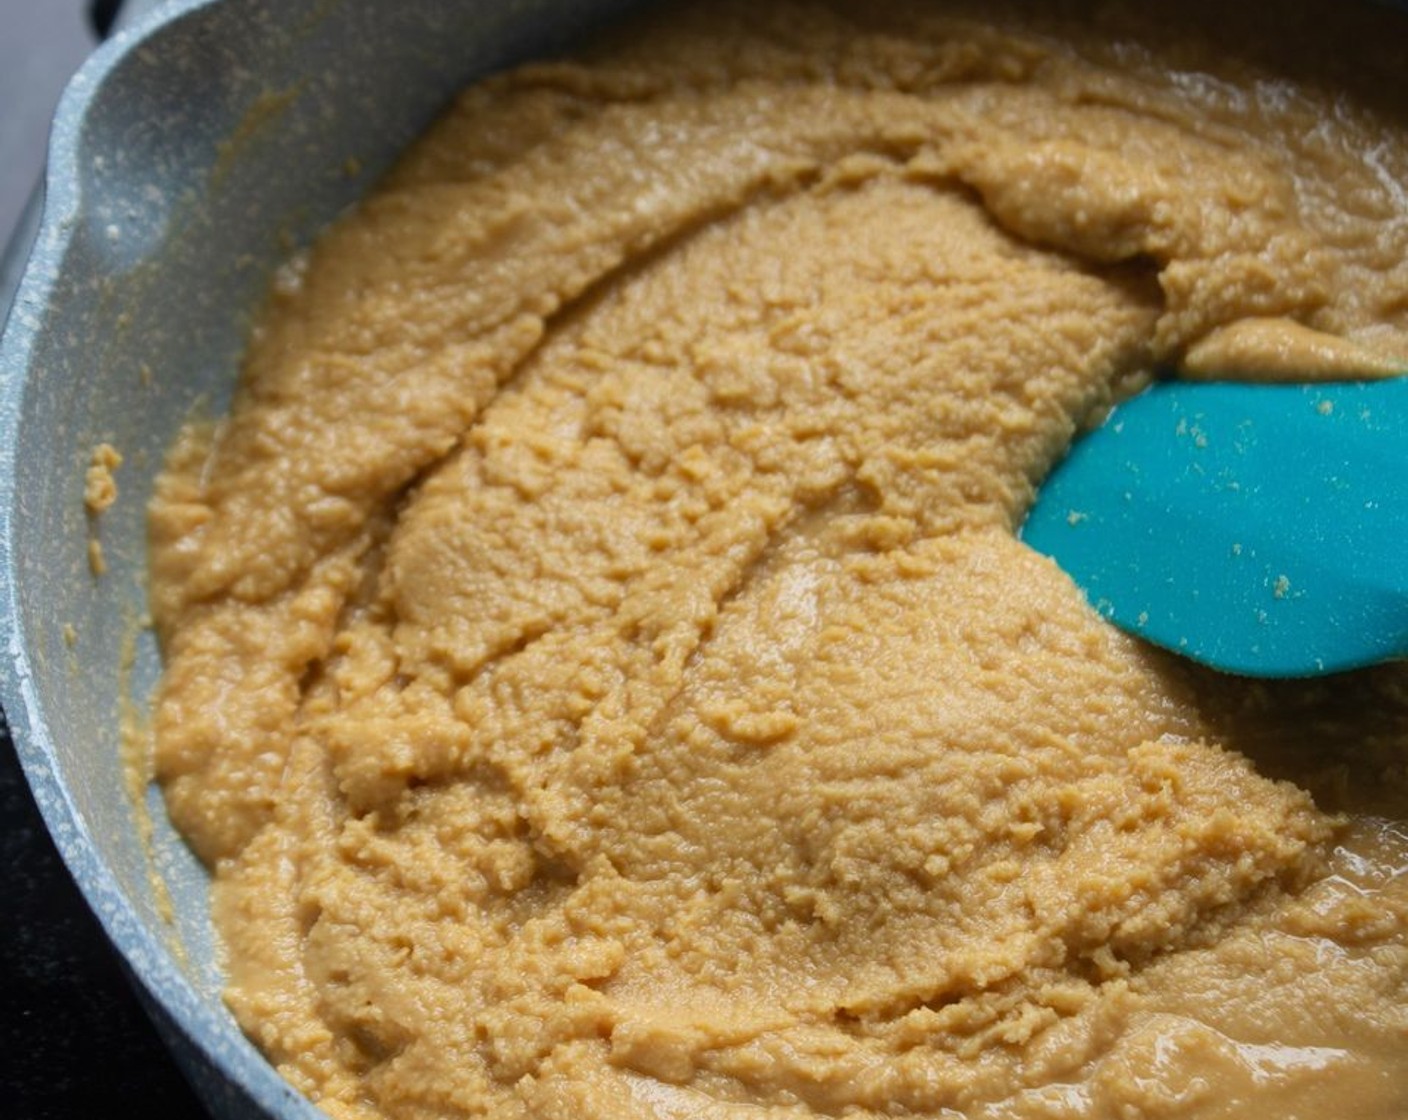 step 2 Melt Ghee (1 1/2 cups) in a non-stick saucepan over medium heat. Once melted, add Chickpea Flour (3 cups) and Semolina (2 Tbsp). Mix continuously for 10 to 12 minutes or until the mixture smells nutty and has darkened in color slightly.